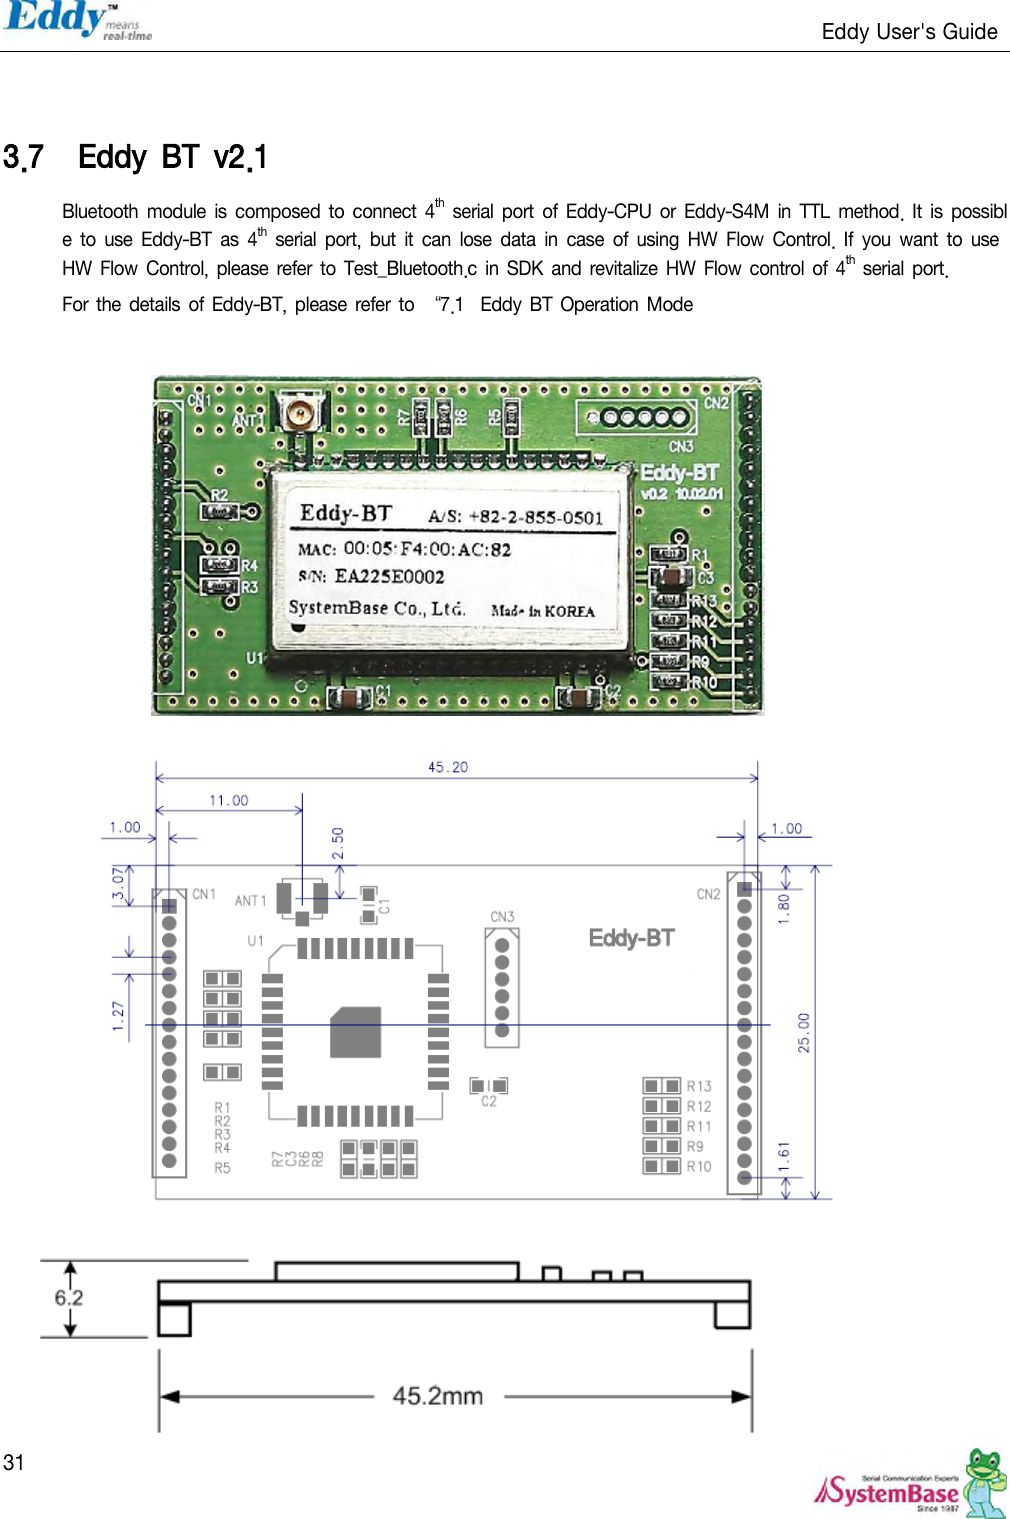                                                                   Eddy User&apos;s Guide   31   3.7 Eddy  BT  v2.1   Bluetooth  module is composed to connect 4th serial port  of Eddy-CPU  or  Eddy-S4M in  TTL method.  It  is  possible  to  use  Eddy-BT  as  4th serial port,  but  it  can  lose  data  in  case  of  using HW  Flow  Control.  If  you want  to  use HW  Flow Control, please  refer to  Test_Bluetooth.c in SDK and revitalize  HW  Flow control  of  4th serial port.   For the details of Eddy-BT, please  refer to ‚7.1   Eddy BT Operation Mode                           